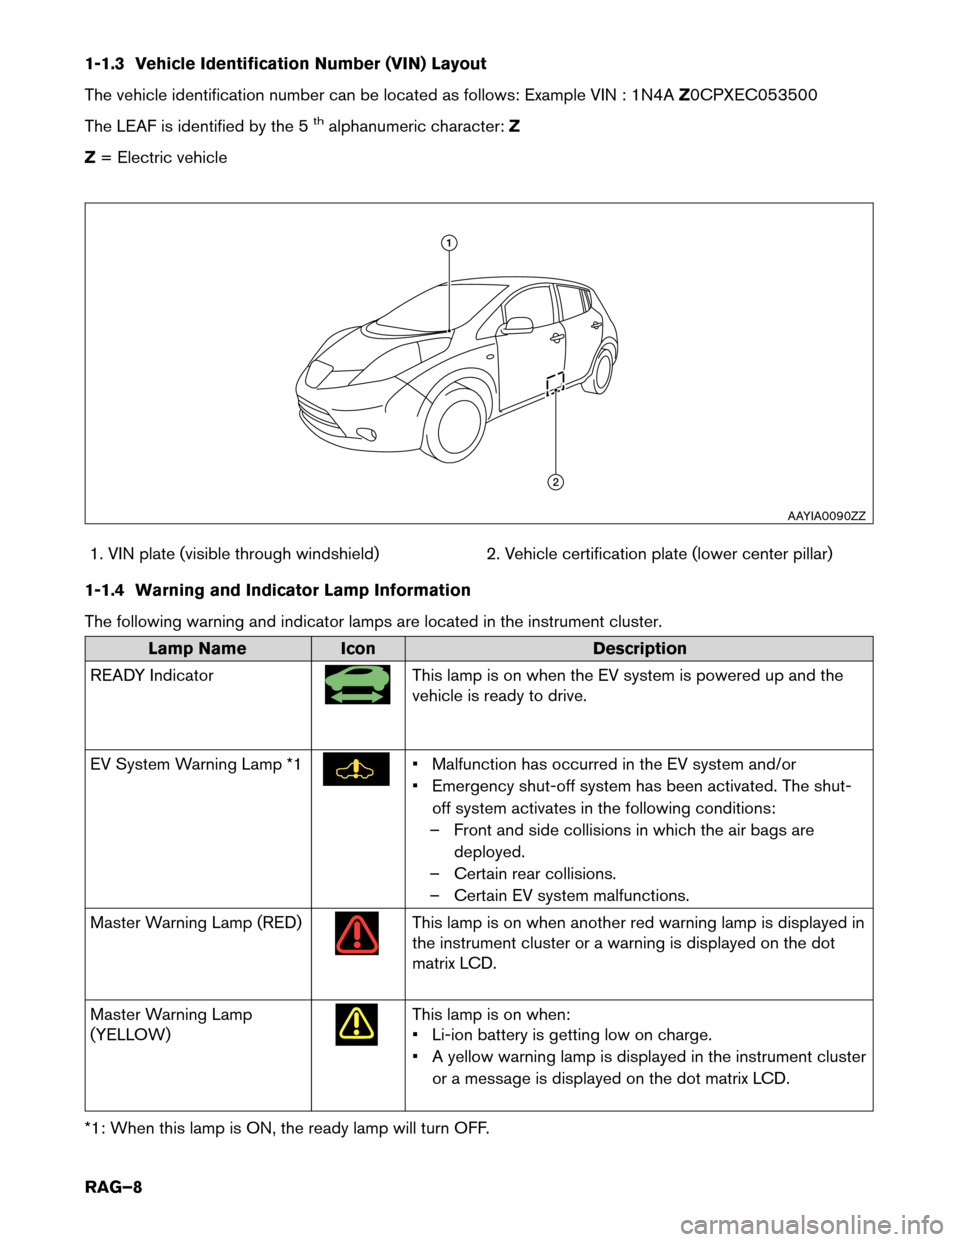 NISSAN LEAF 2014 1.G Roadside Assistance Guide 1-1.3 Vehicle Identification Number (VIN) Layout
The
vehicle identification number can be located as follows: Example VIN : 1N4A Z0CPXEC053500
The LEAF is identified by the 5
thalphanumeric character: